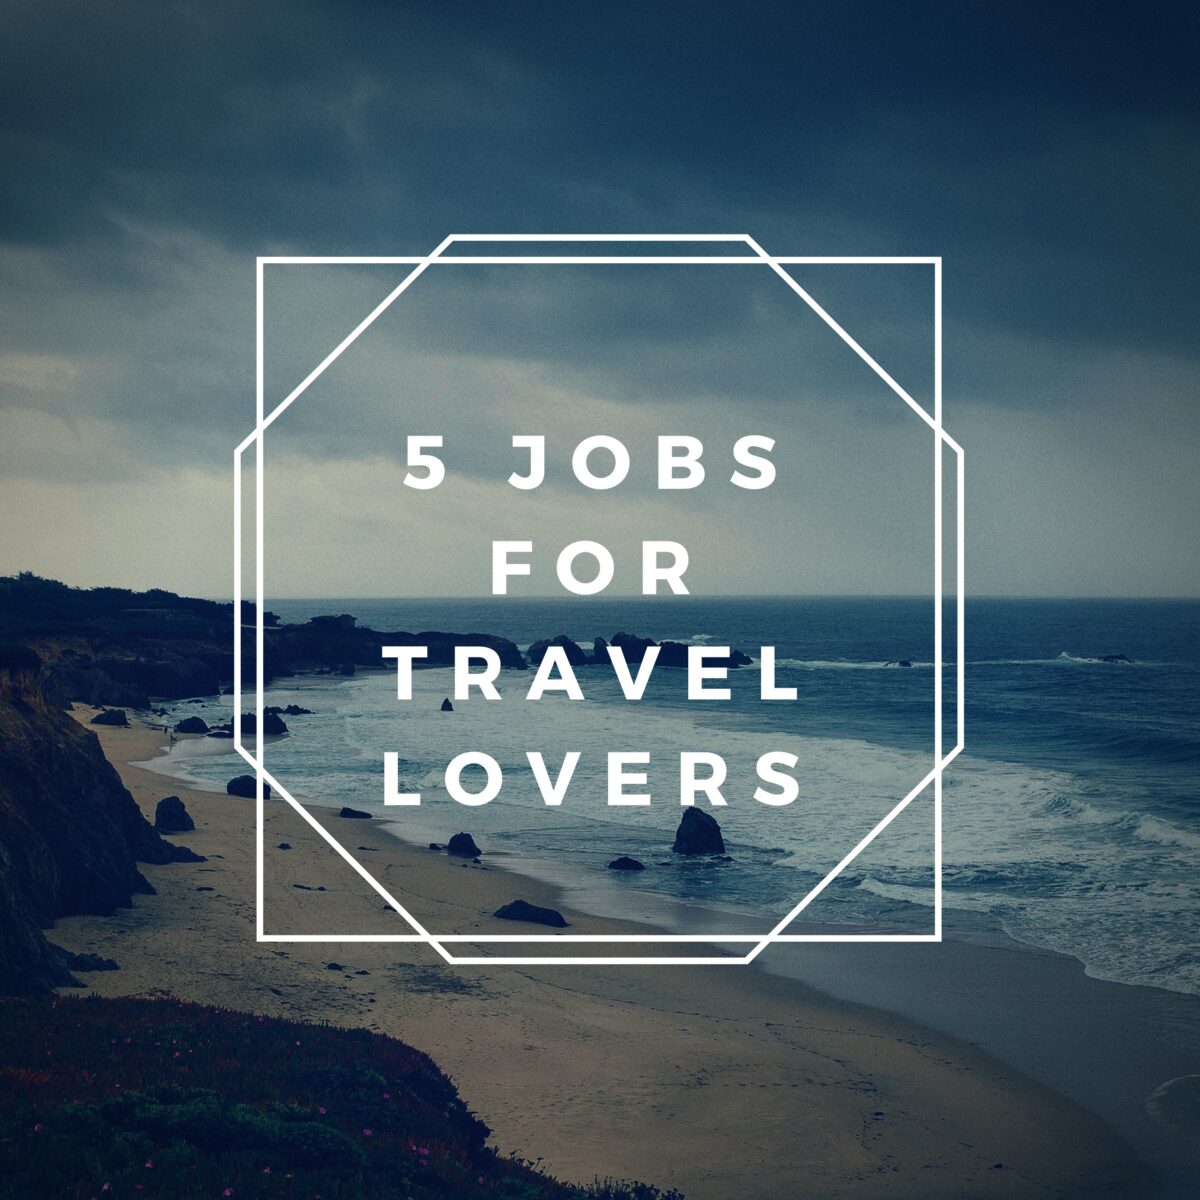 career options for travel lovers